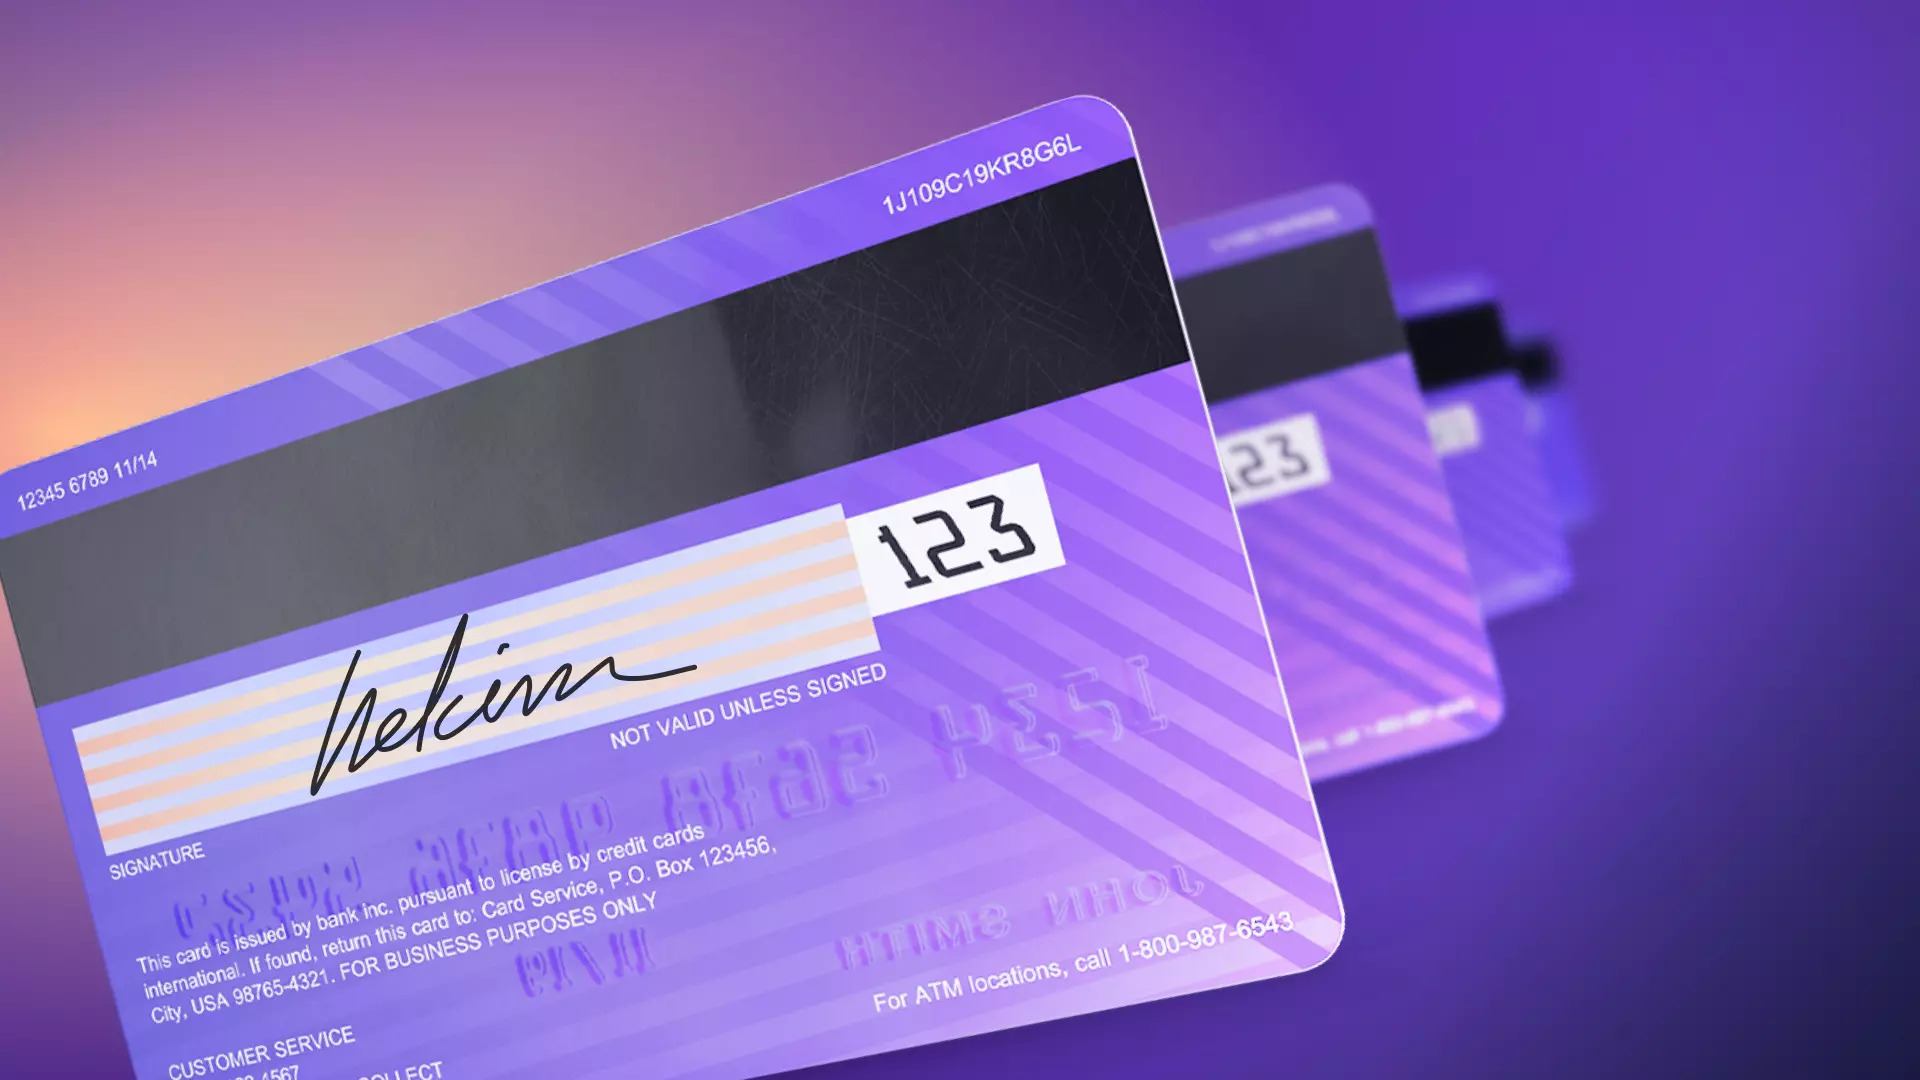 Purple orange gradient with back of credit card showing a signature and CVV code